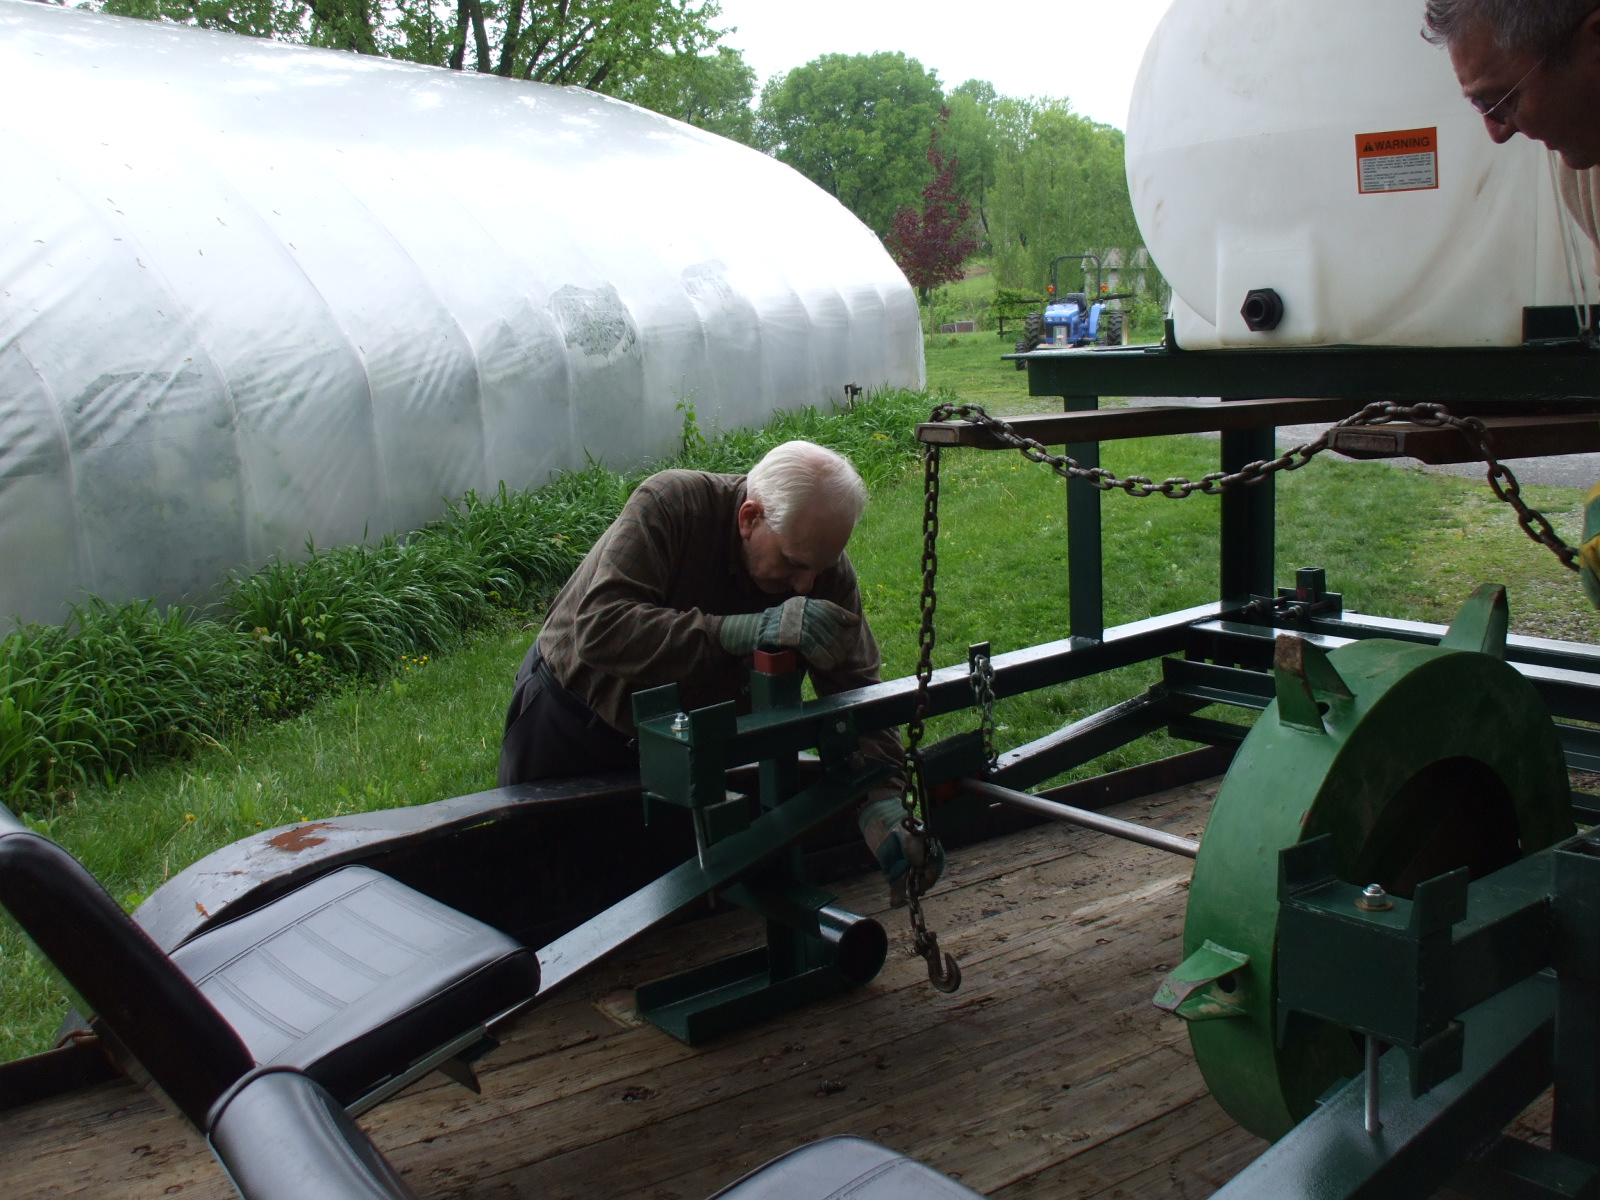 Notes from the Farm: Homemade waterwheel transplanter